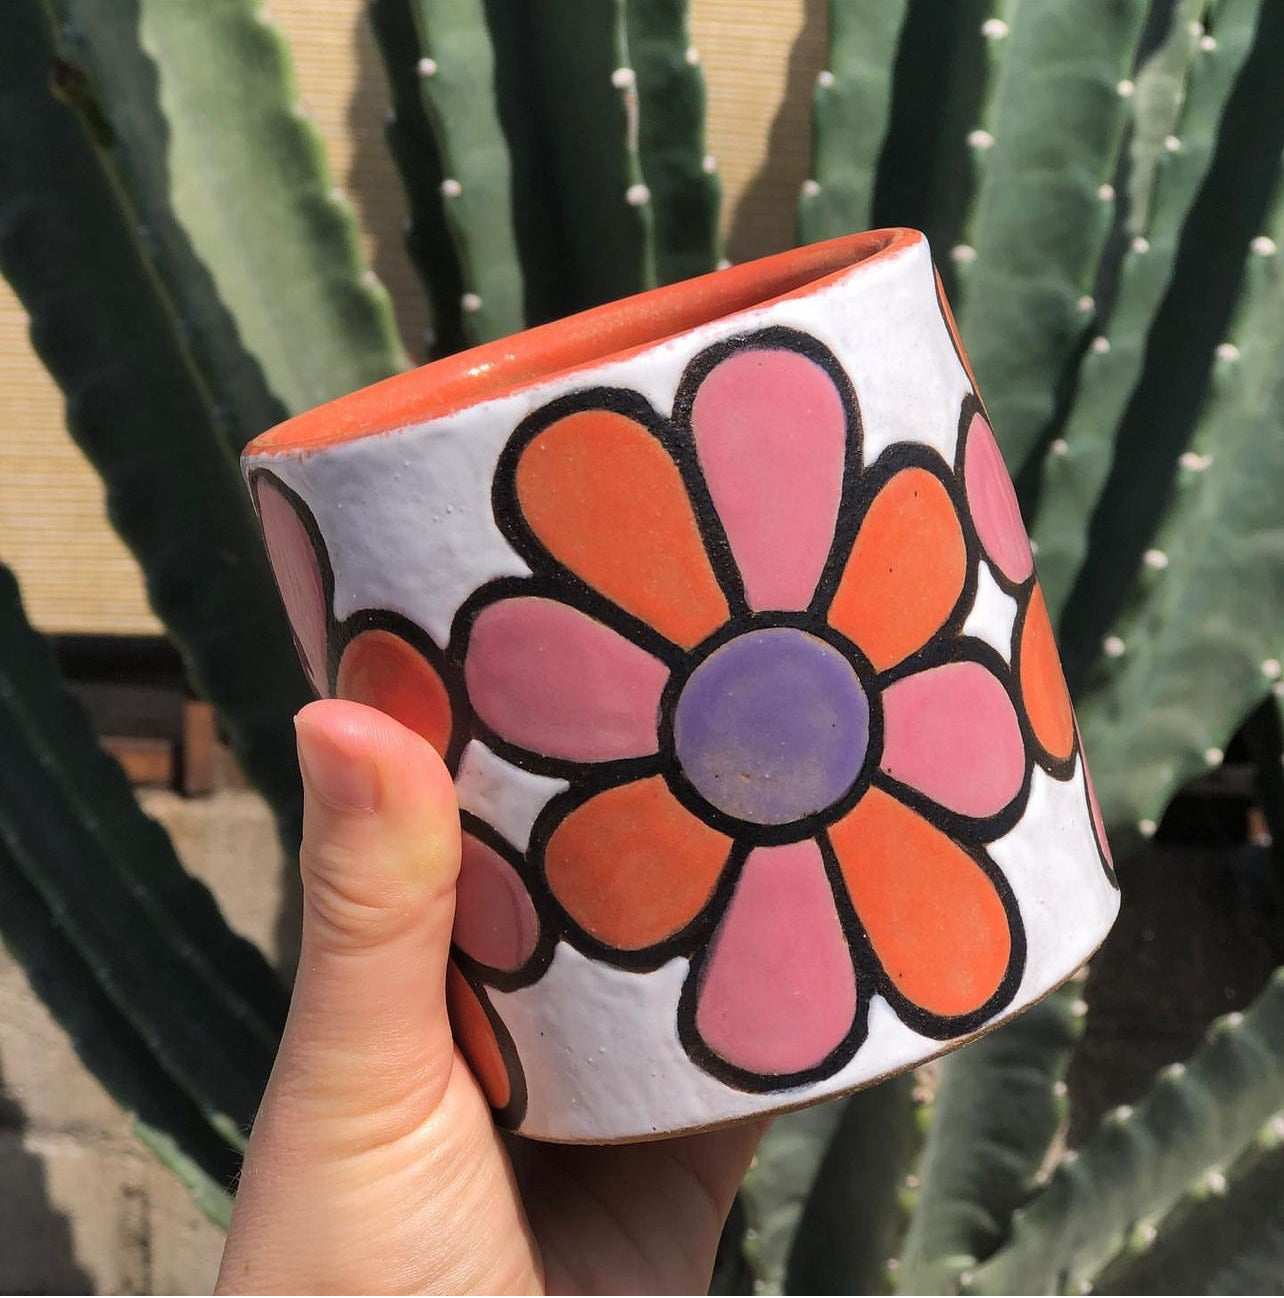 Made-To-Order Glazed Stoneware Tumbler with Flower Pattern